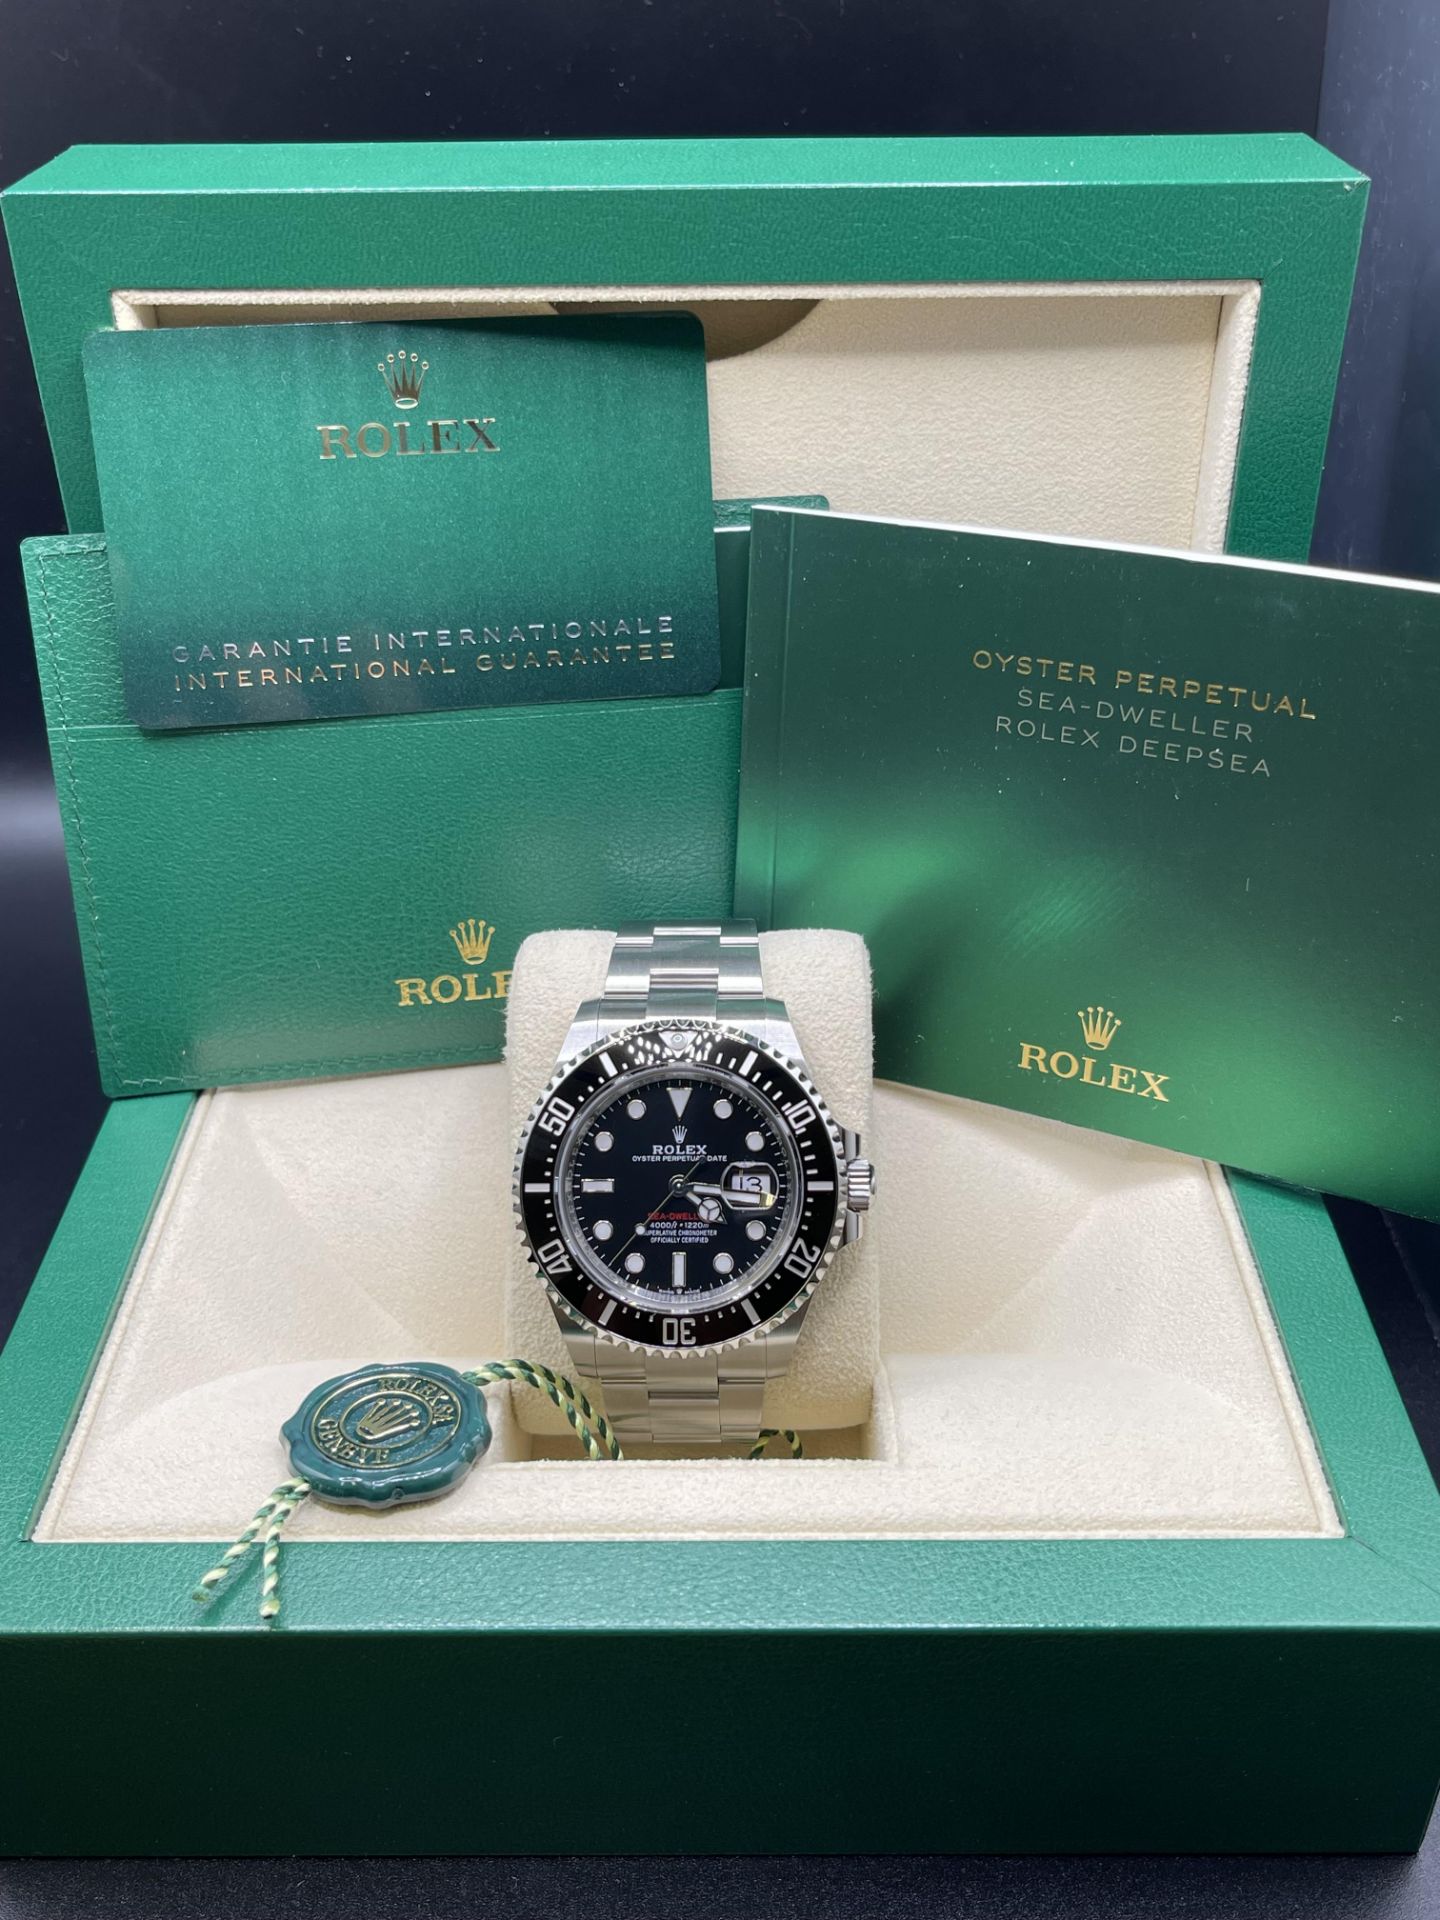 ** ON SALE ** Rolex Sea Dweller Oyster Perpetual Oystersteel - Oyster Bracelet 2022 - Brand New - Image 2 of 25